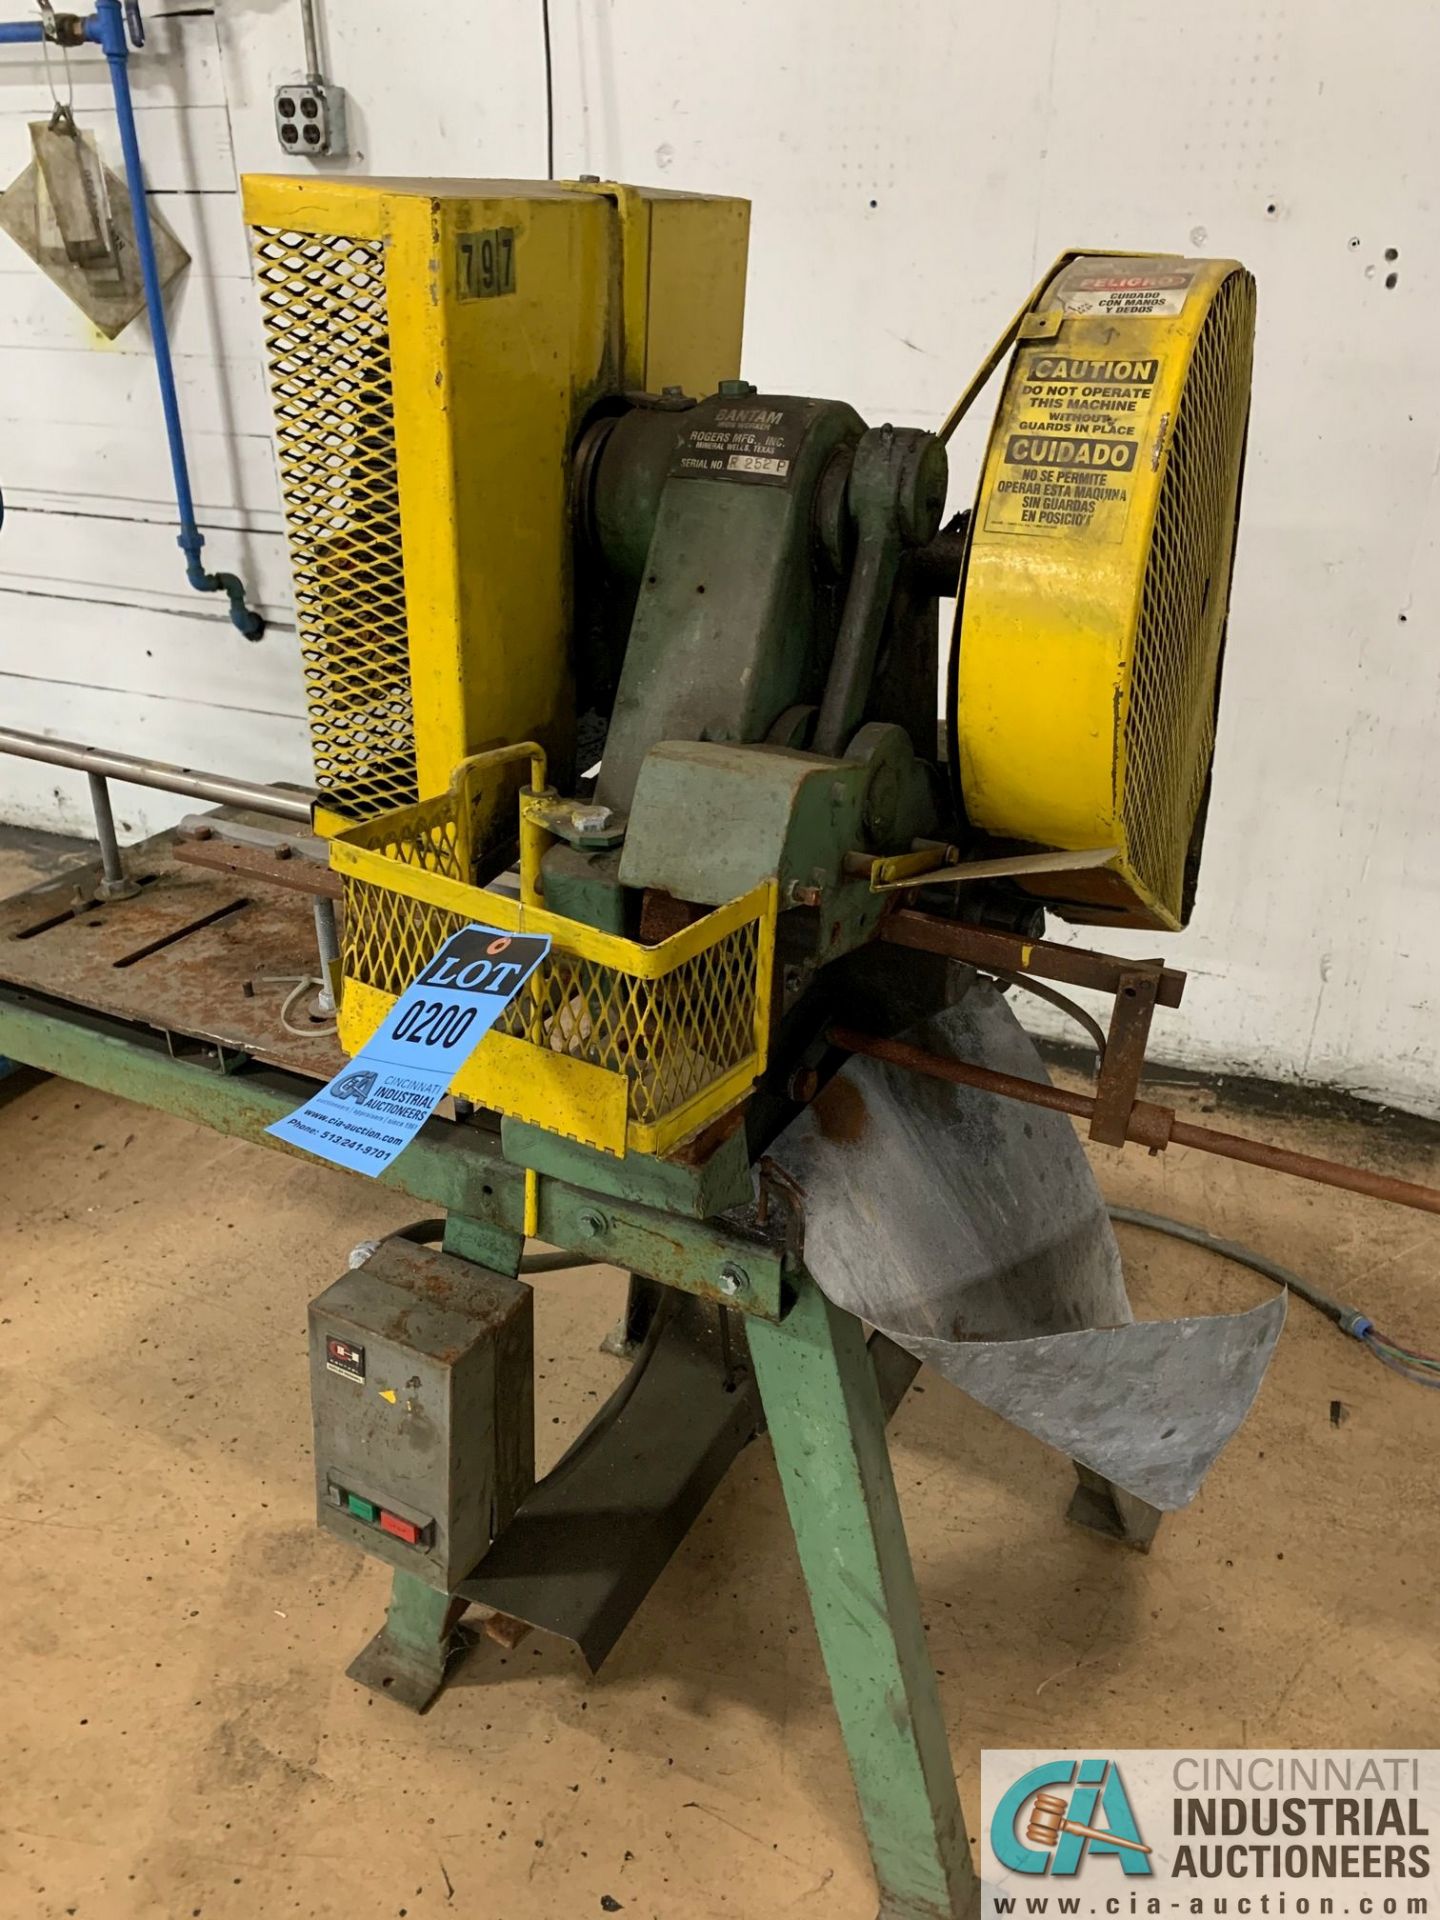 ROGERS BANTAM MECHANICAL IRONWORKER; S/N R252P, PUNCH, 5" SHEAR - Image 2 of 5